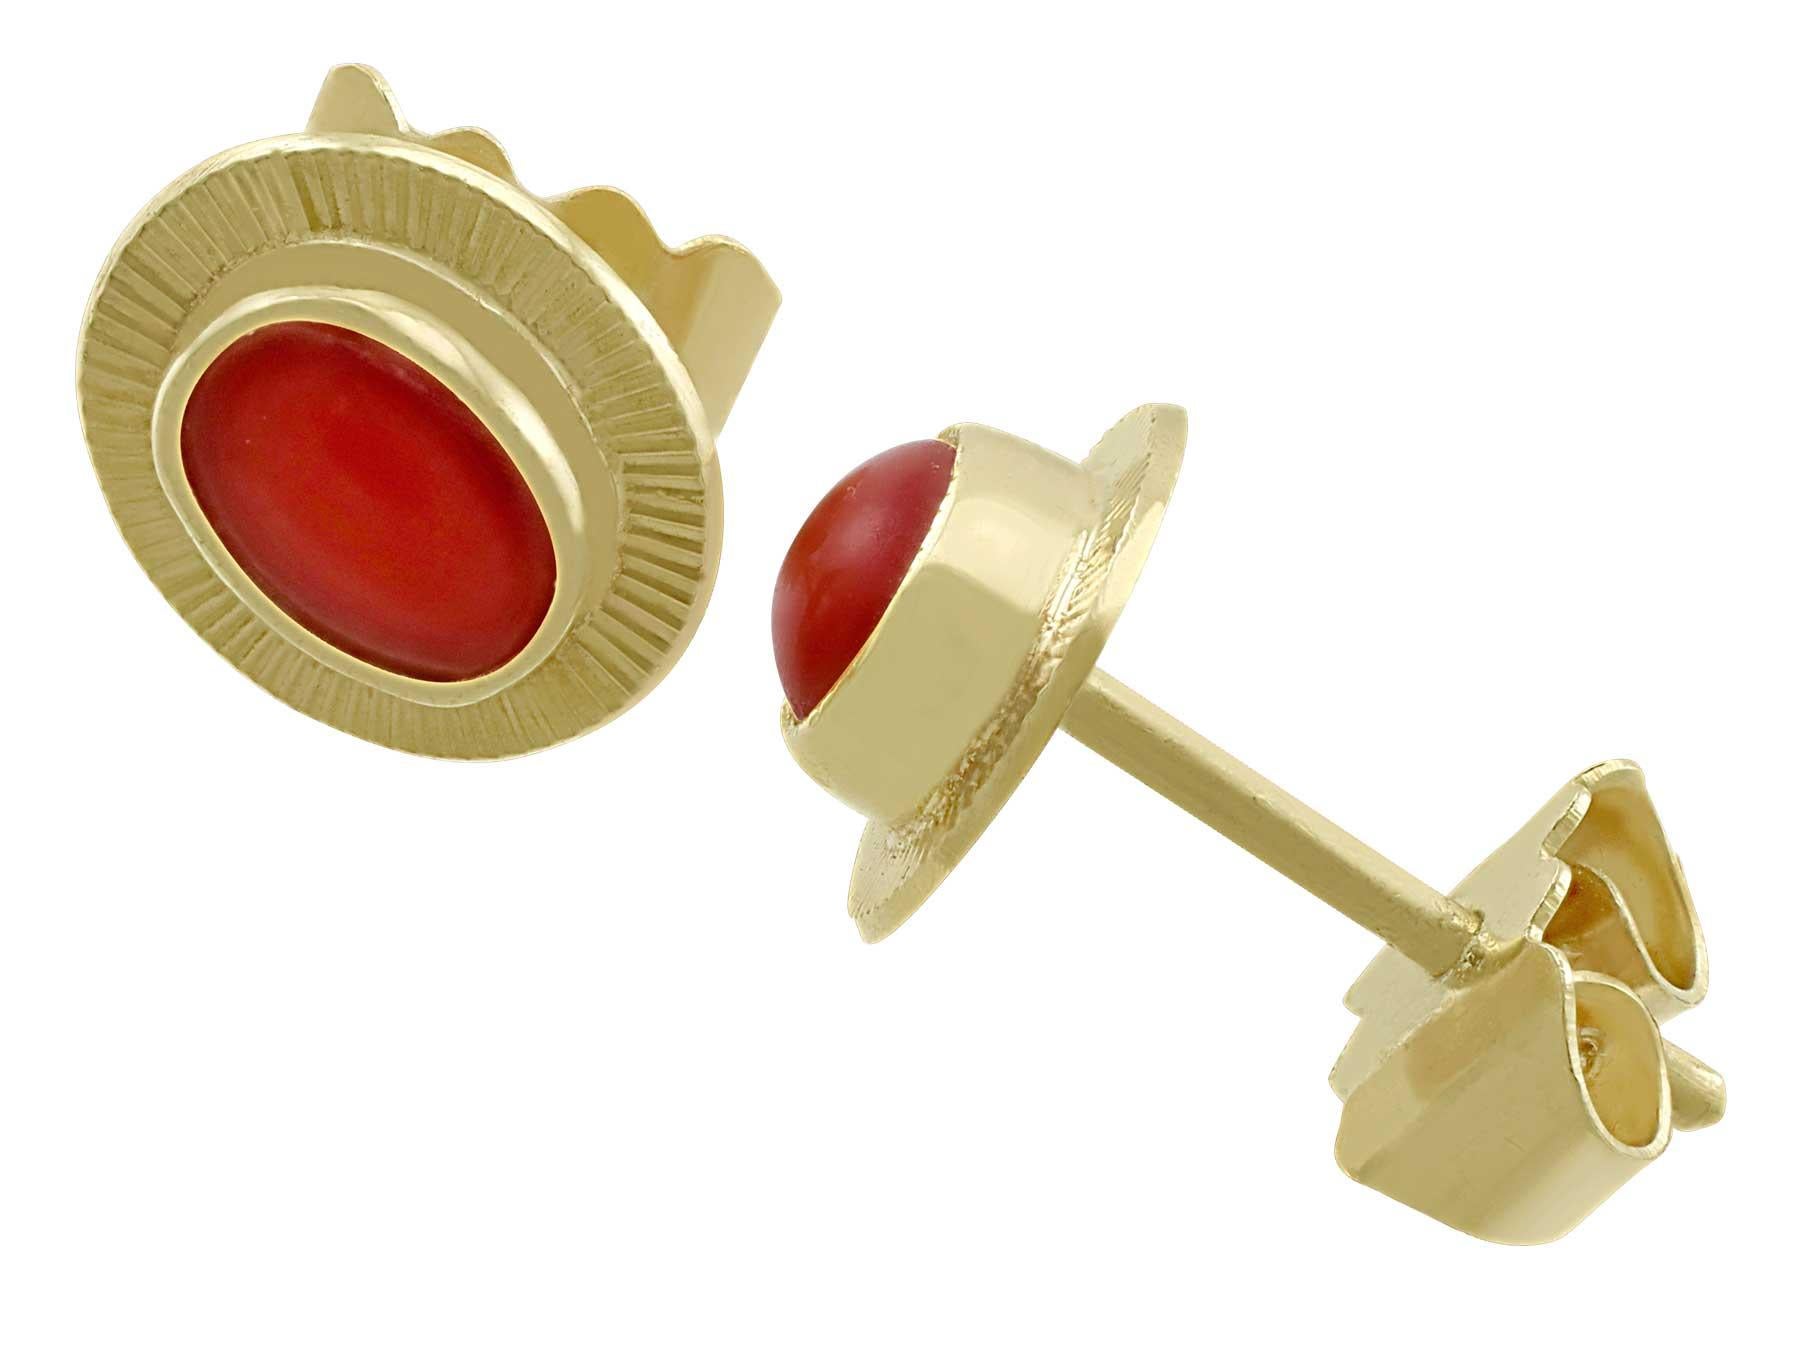 A fine and impressive pair of coral and 18 karat yellow gold stud earrings; part of our vintage jewelry and estate jewelry collections

This fine and impressive pair of vintage coral stud earrings has been crafted in 18k yellow gold.

Each earring